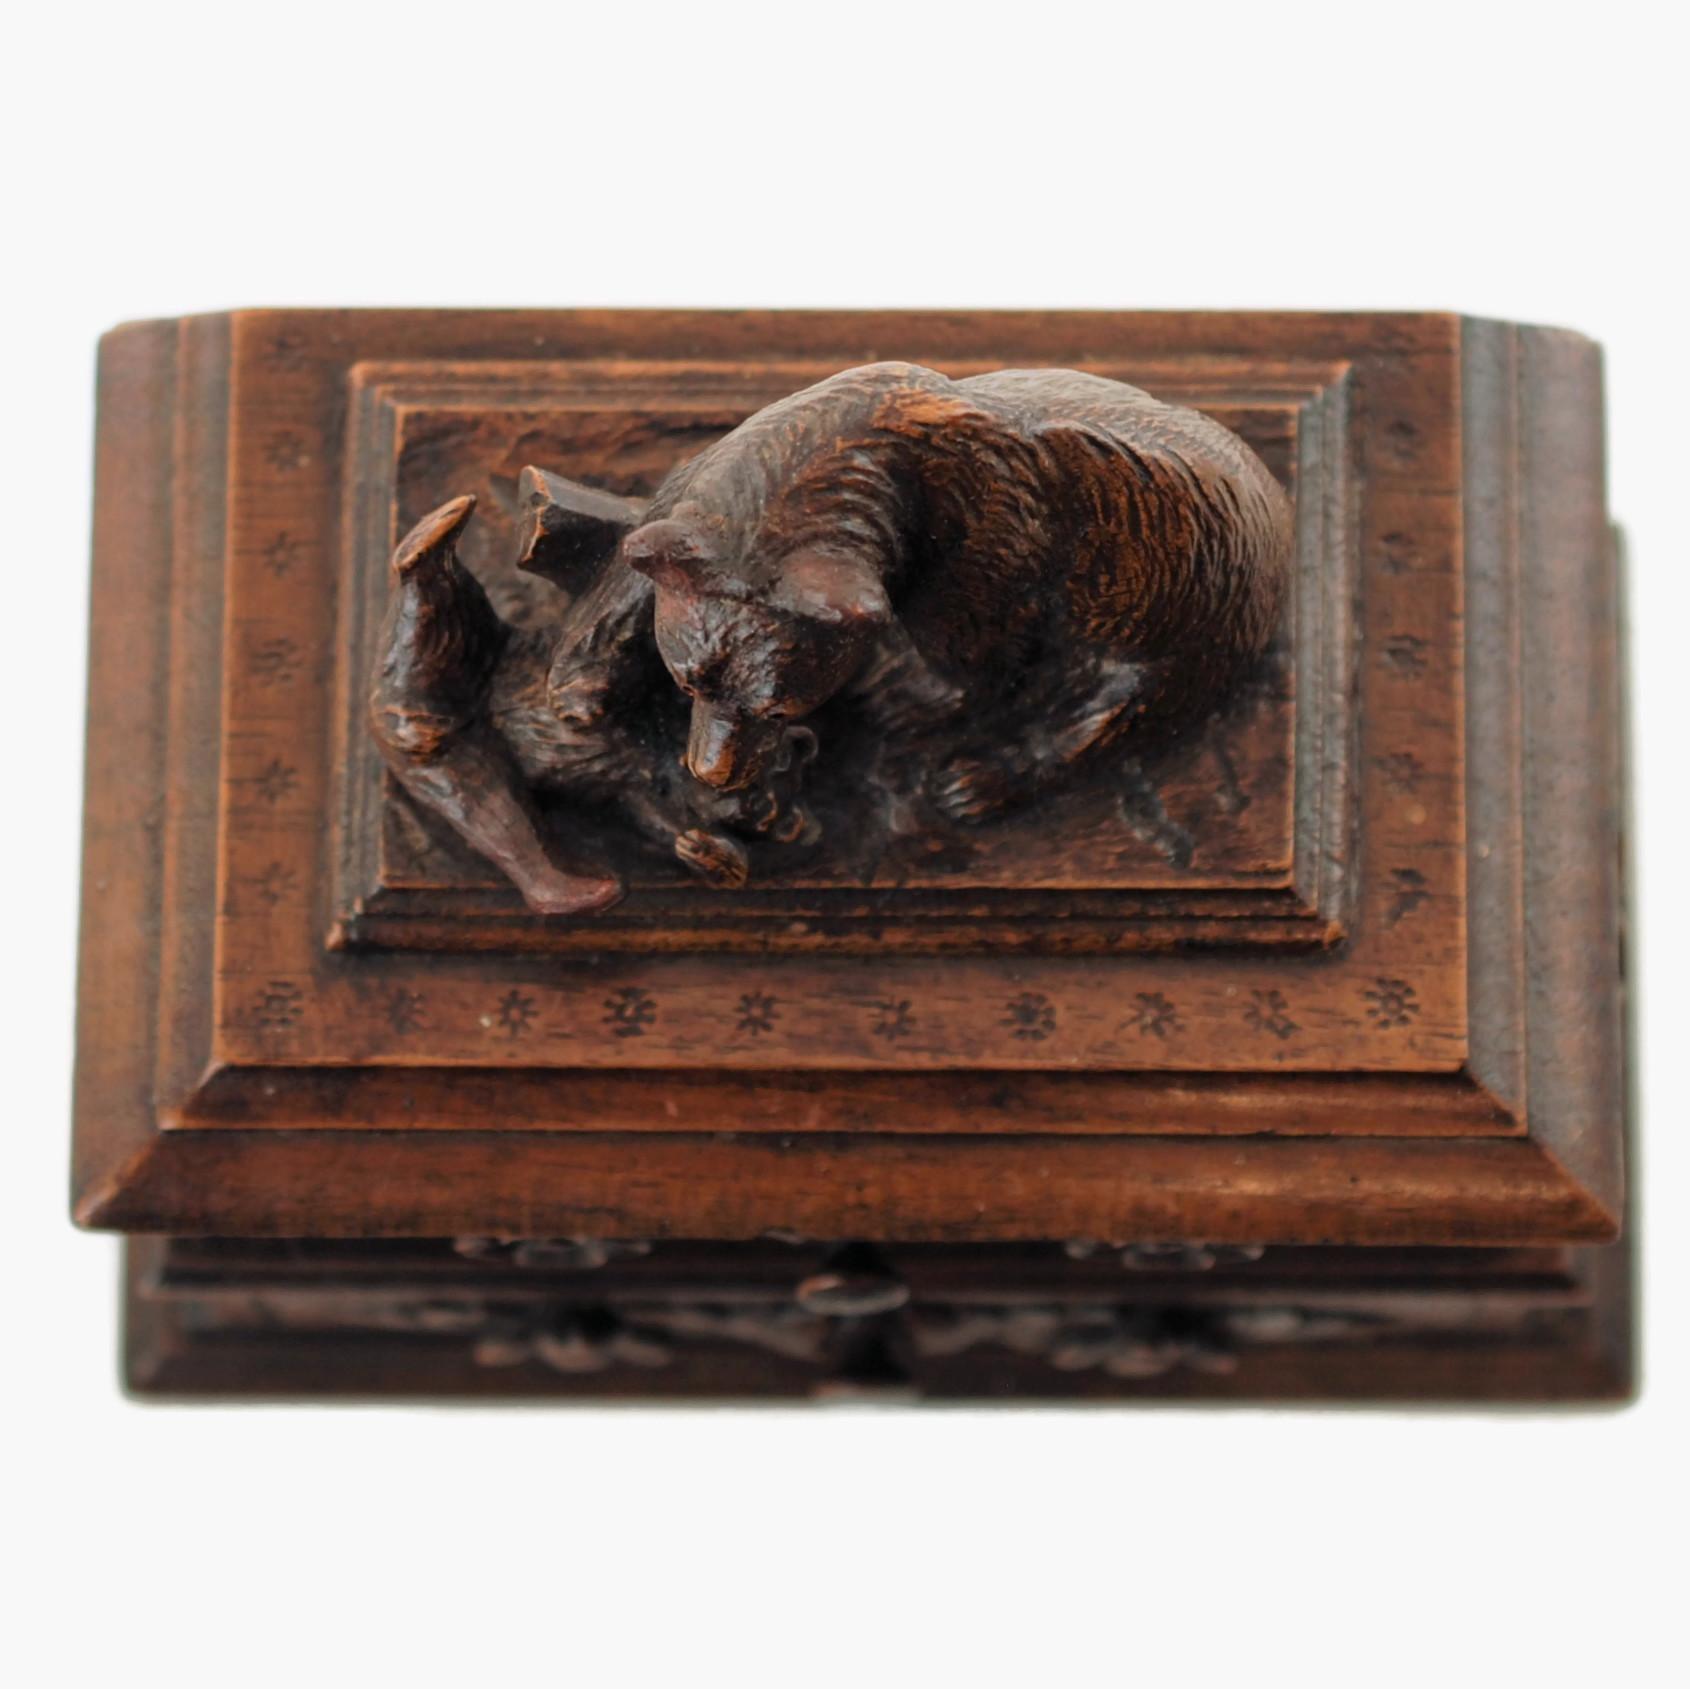 19th Century Black Forest Carved Bear Motif Wood Box with Swing-Out Compartment In Good Condition For Sale In Cincinnati, OH